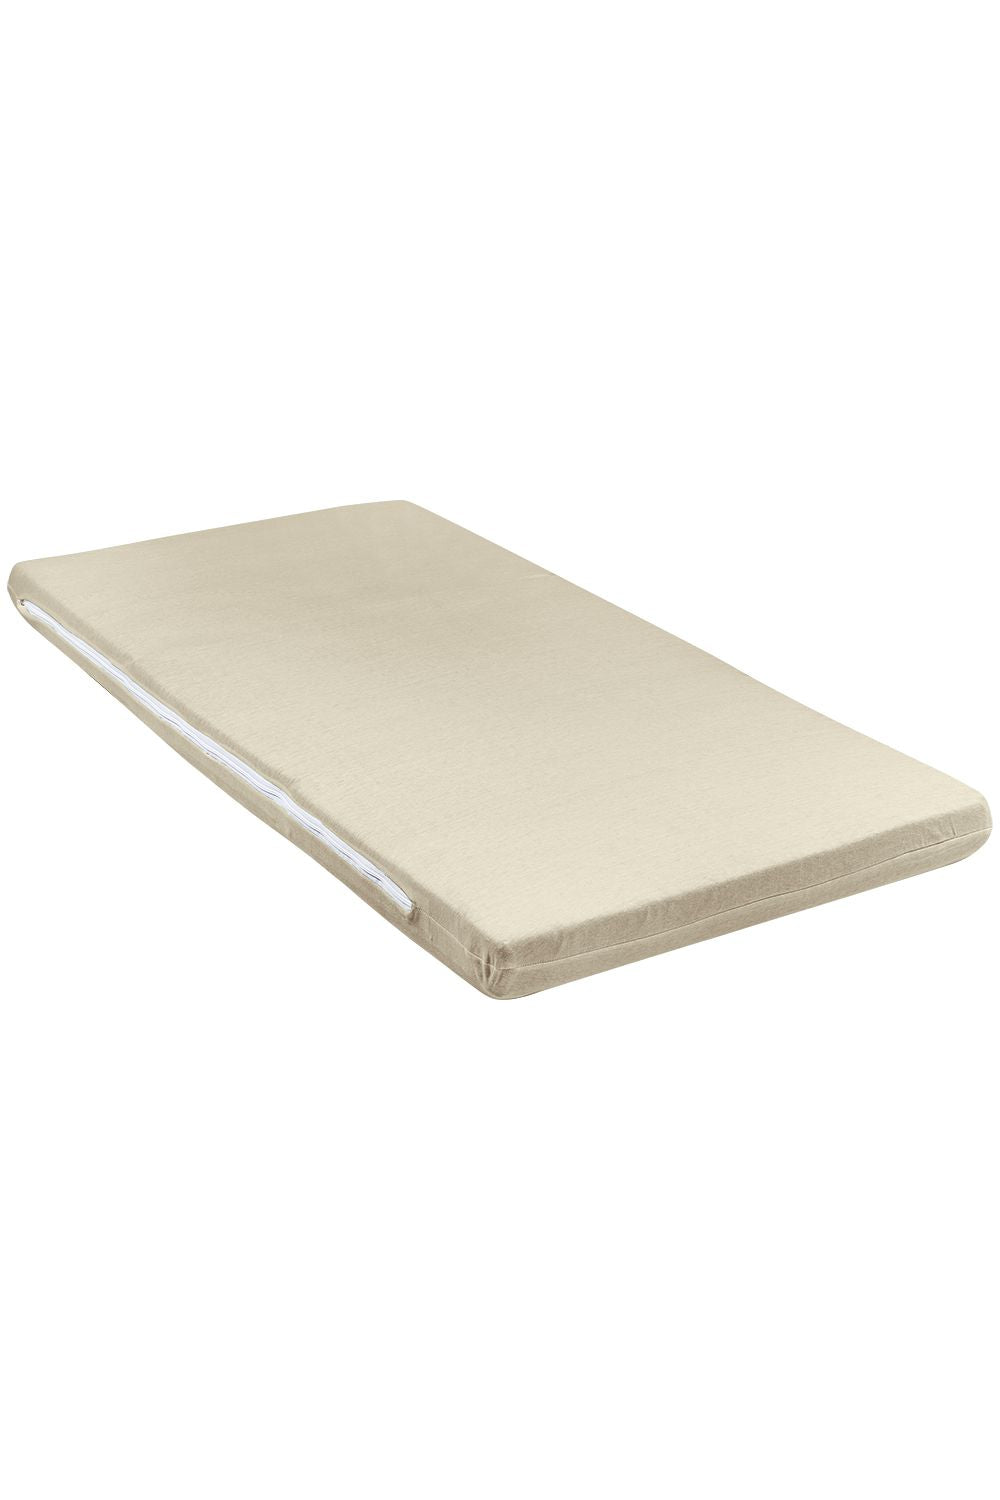 Camping bed mattress fitted sheet 60x120 cm Deluxe